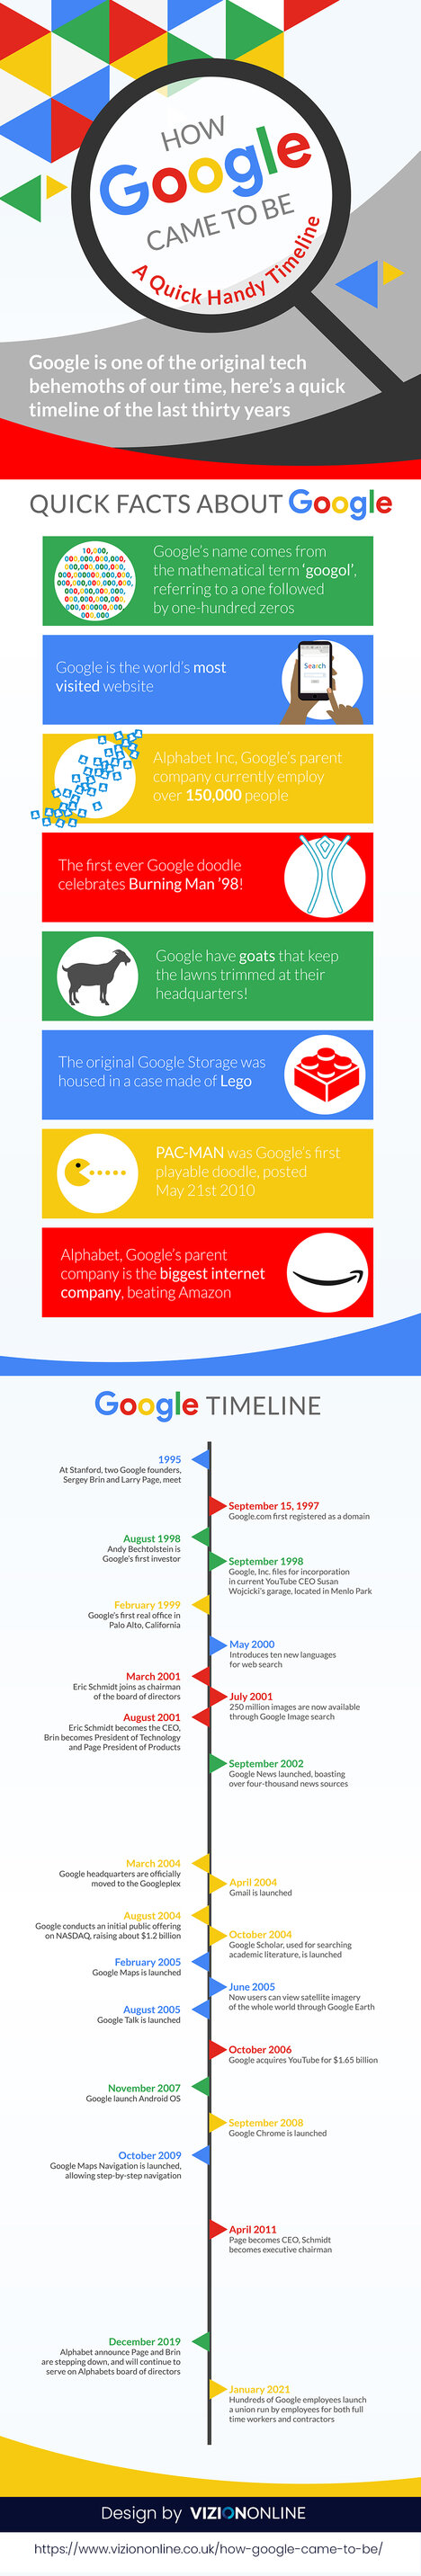 How Google Came To Be